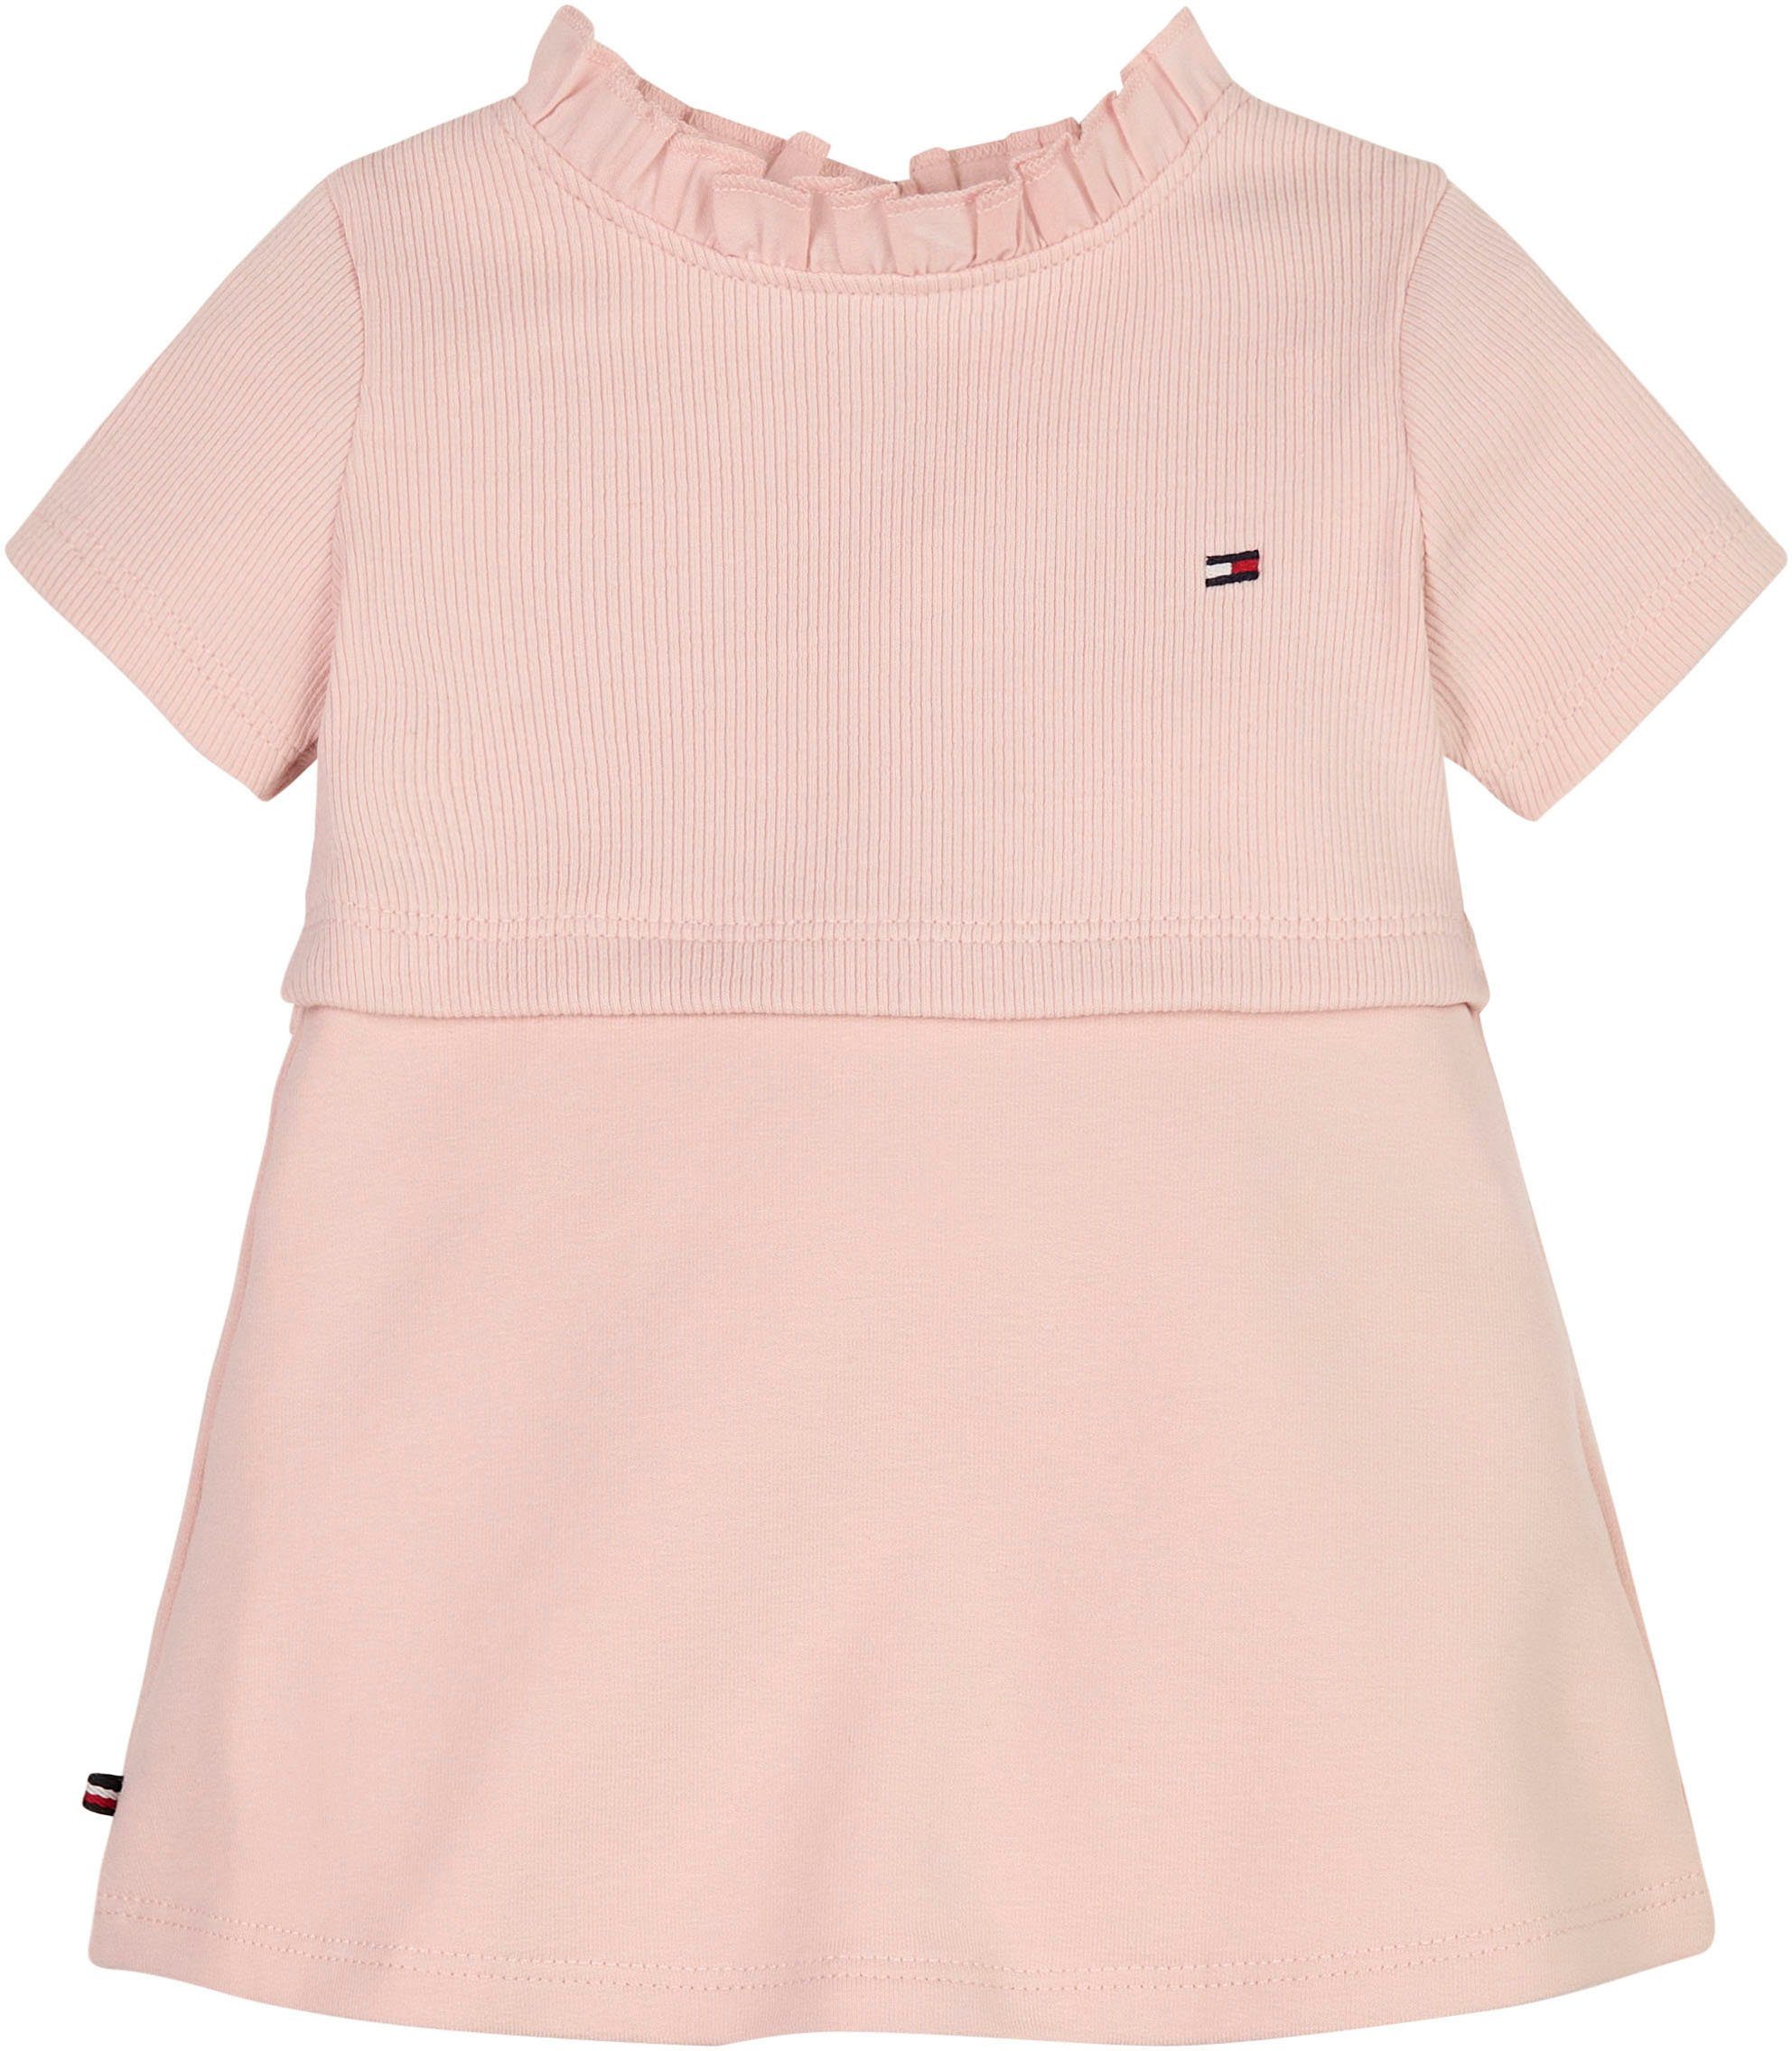 Tommy Whimsy DRESS S/S Hilfiger mit BABY Pink Jerseykleid FLAG Rippenstrick